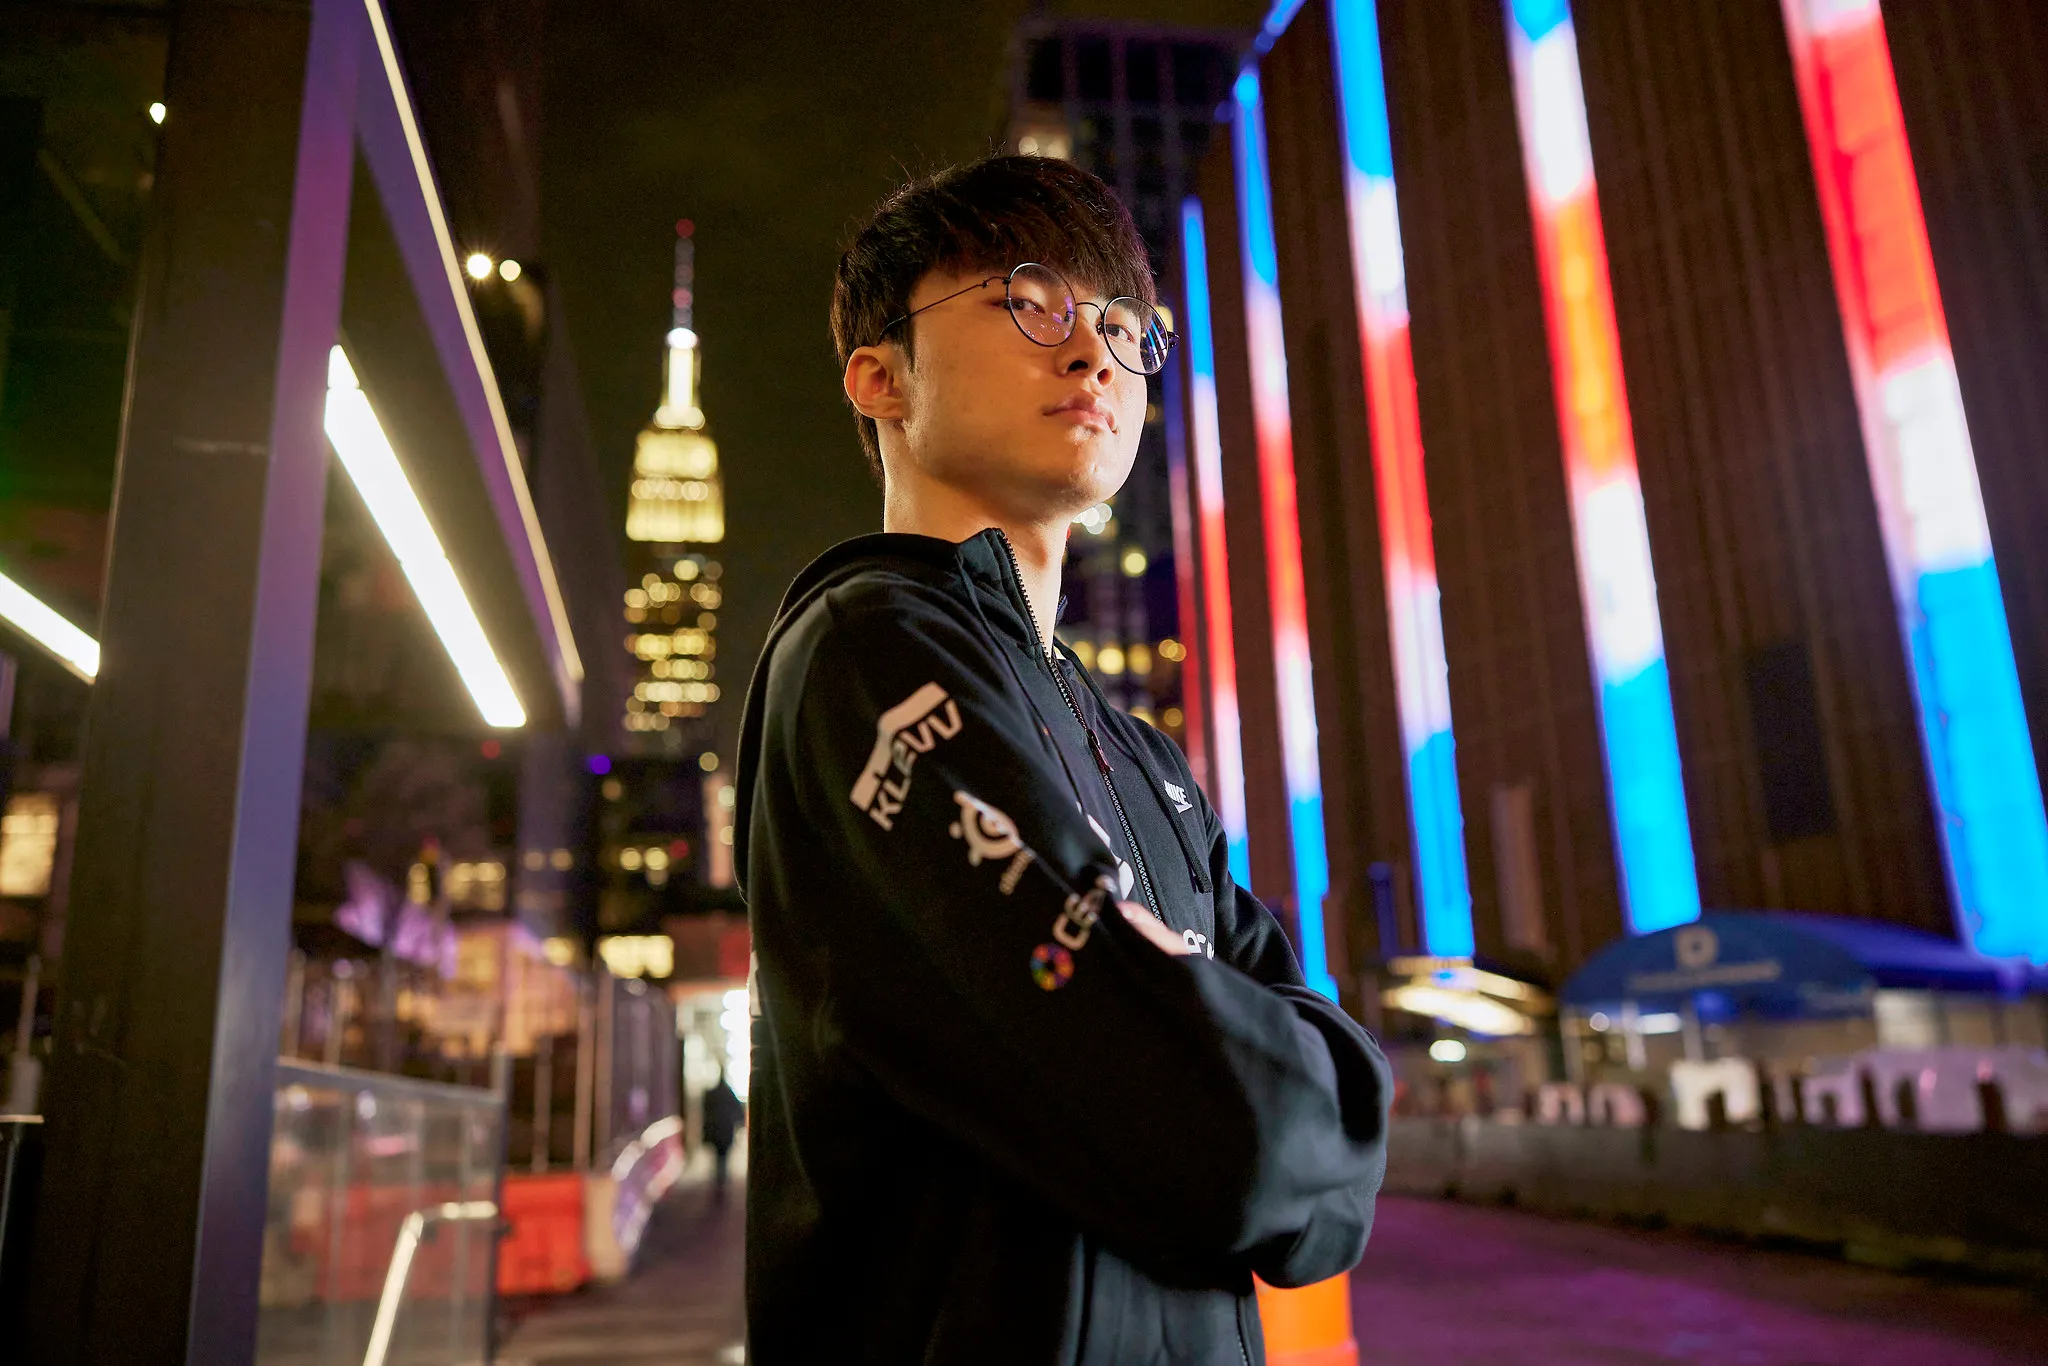 Faker's return to T1 and analysis of their viewership without him